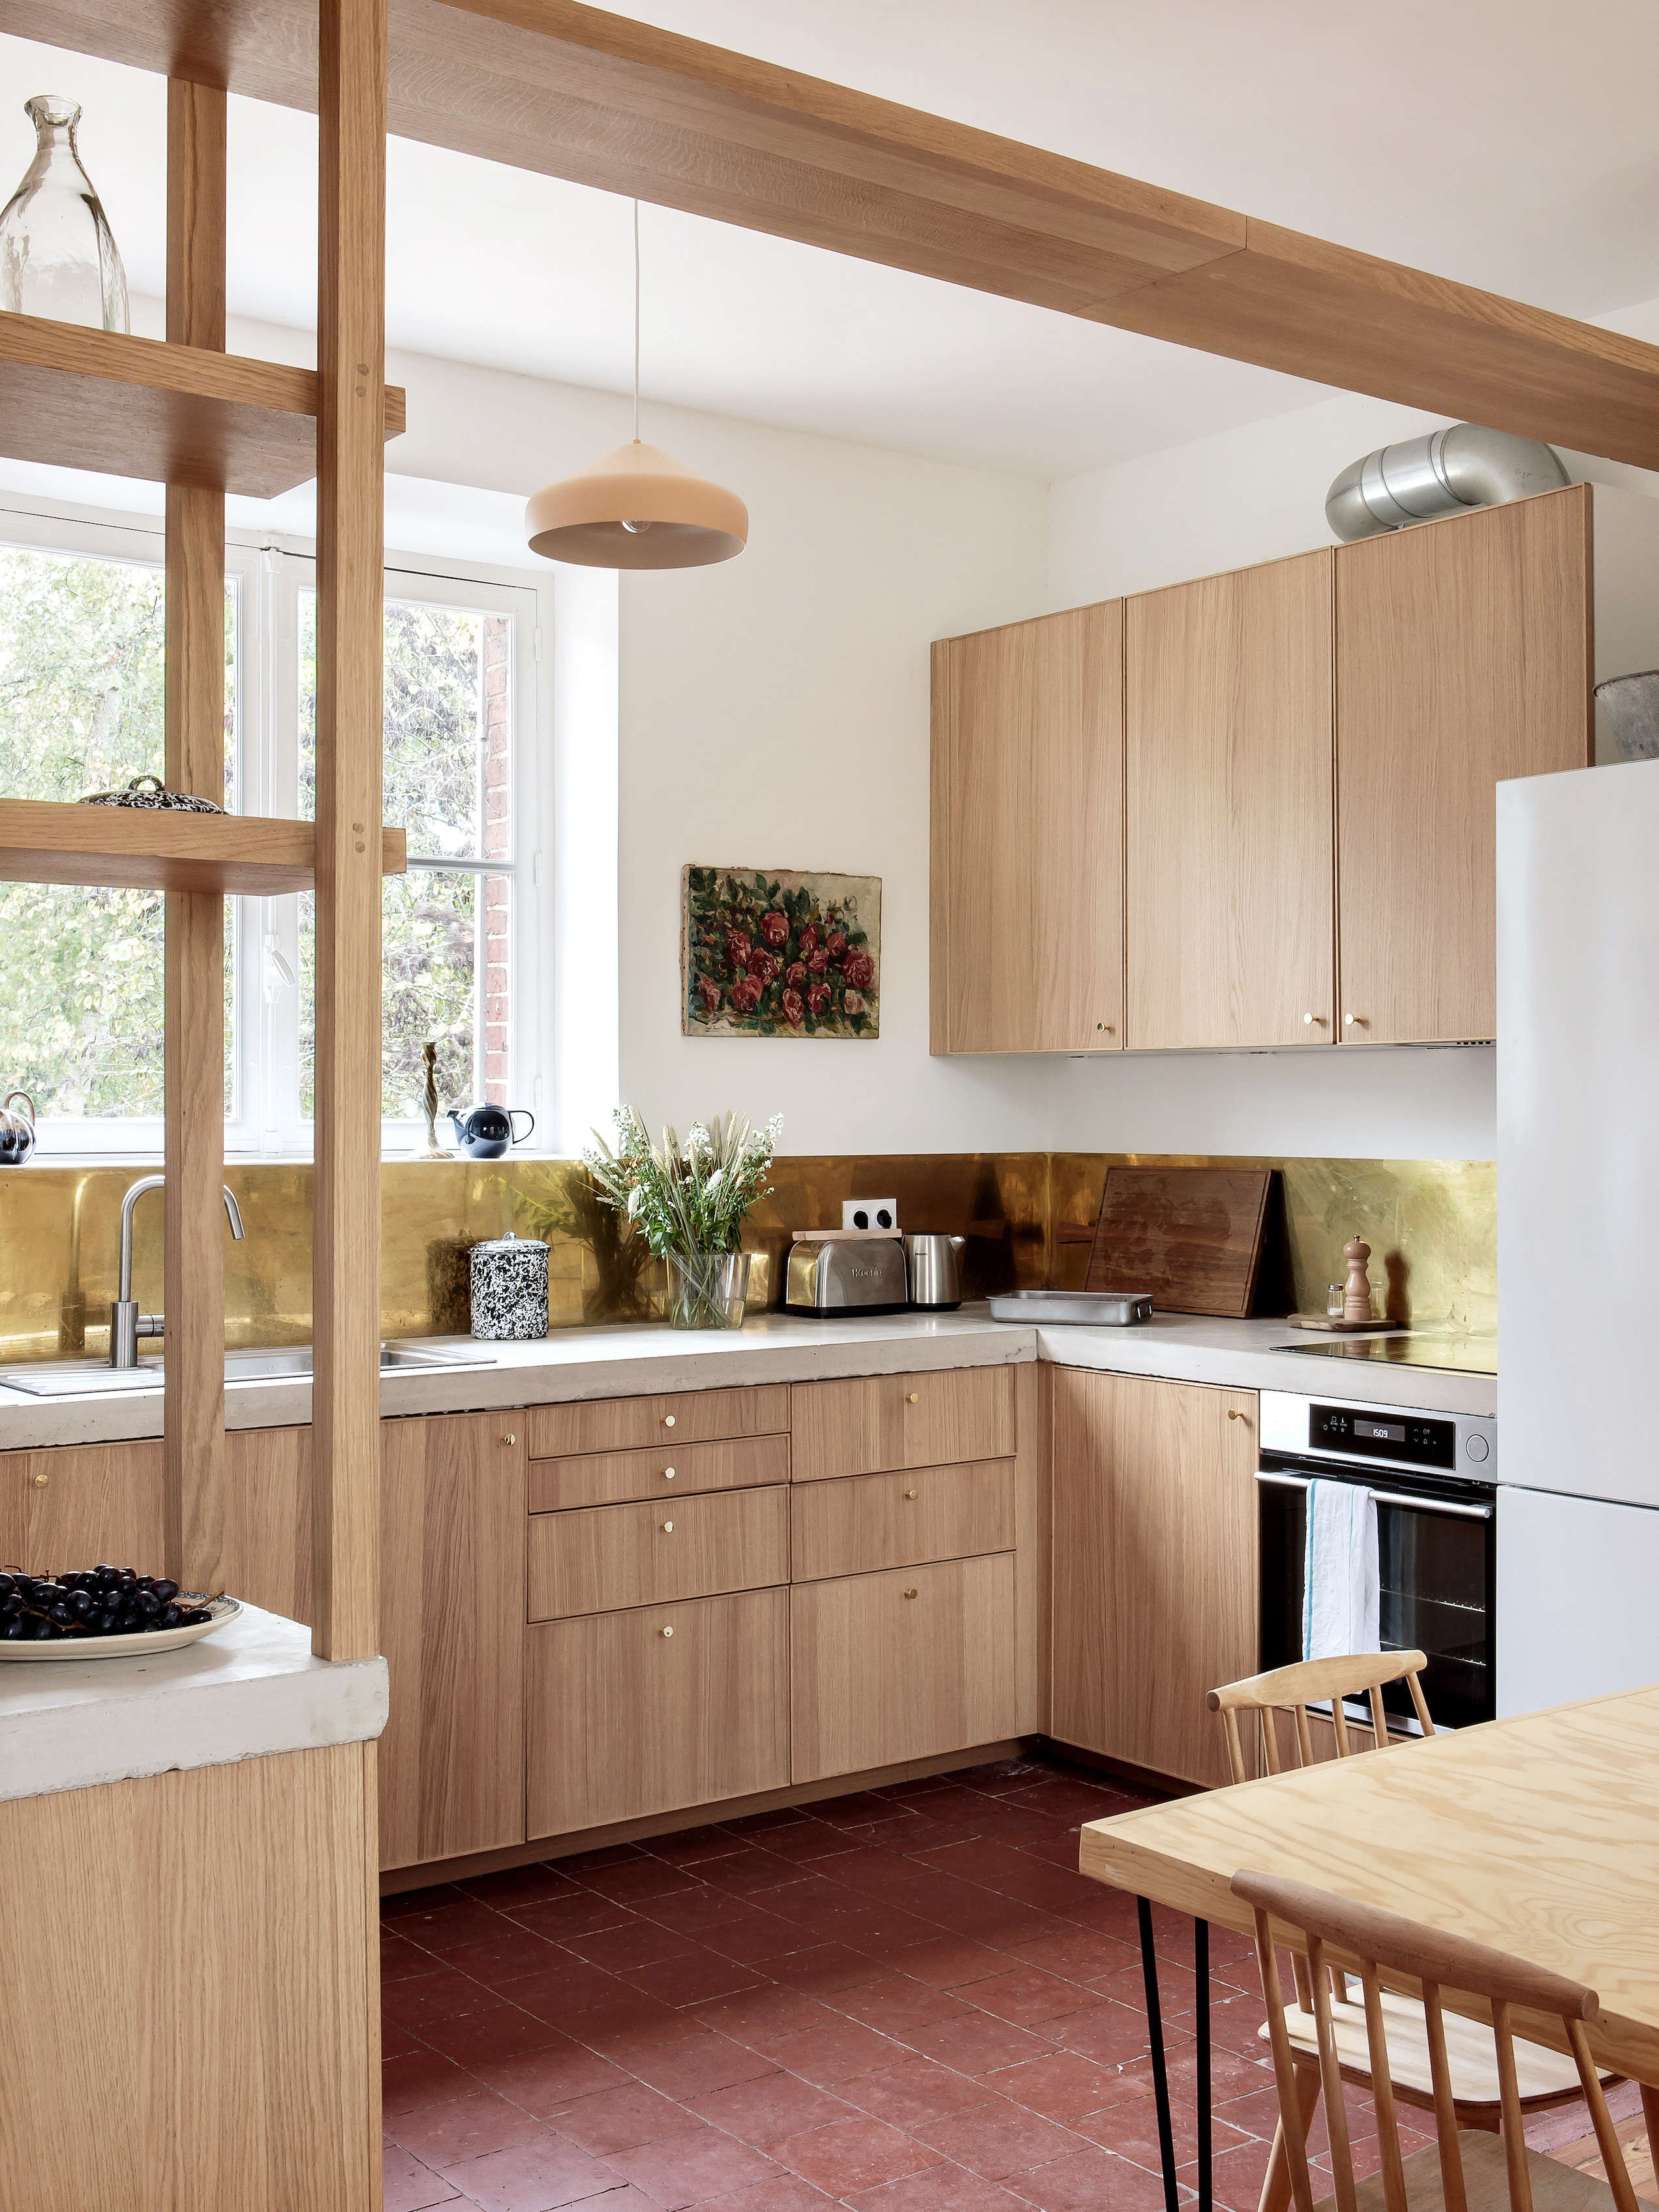 In Praise Of Ikea 20 Kitchens, What Are High Quality Kitchen Cabinets Made Of Ikea